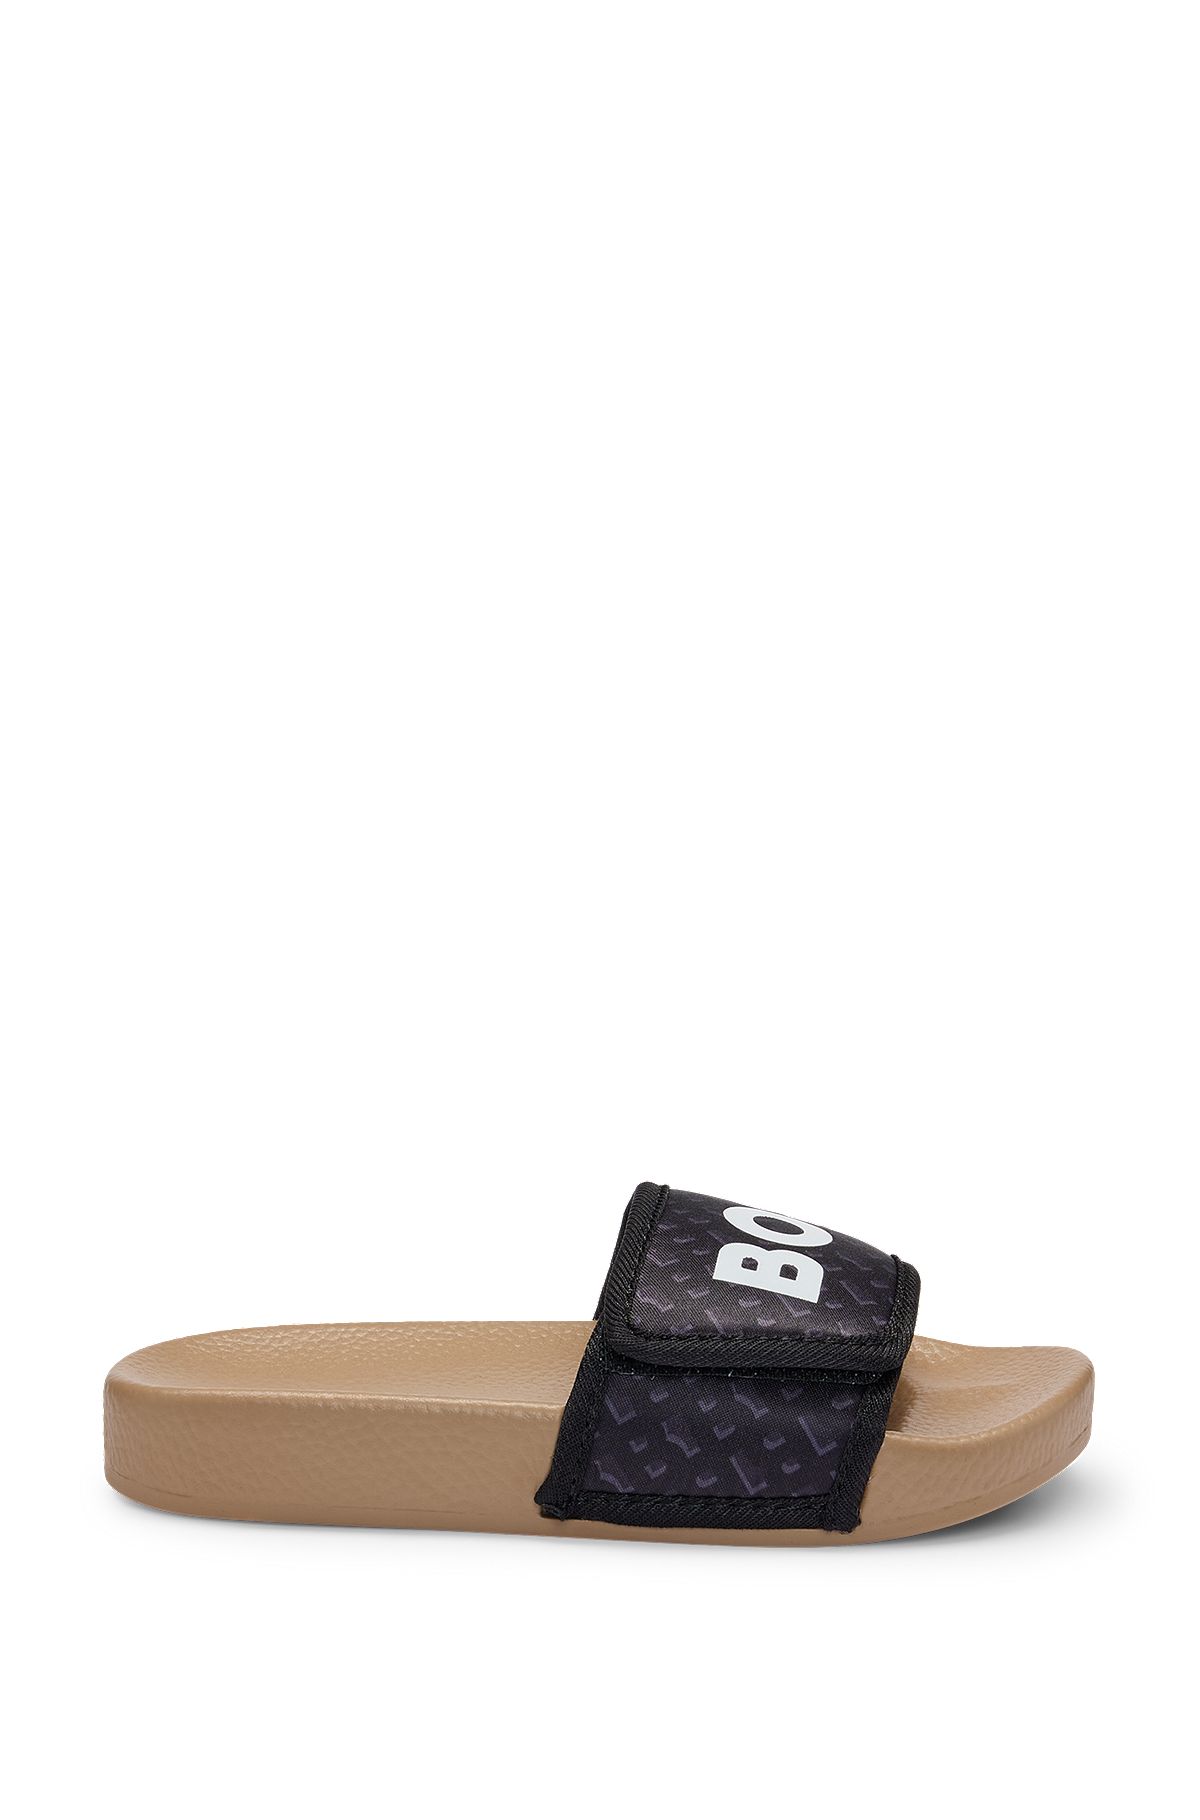 Kids' slides with monograms and contrast logo, Black